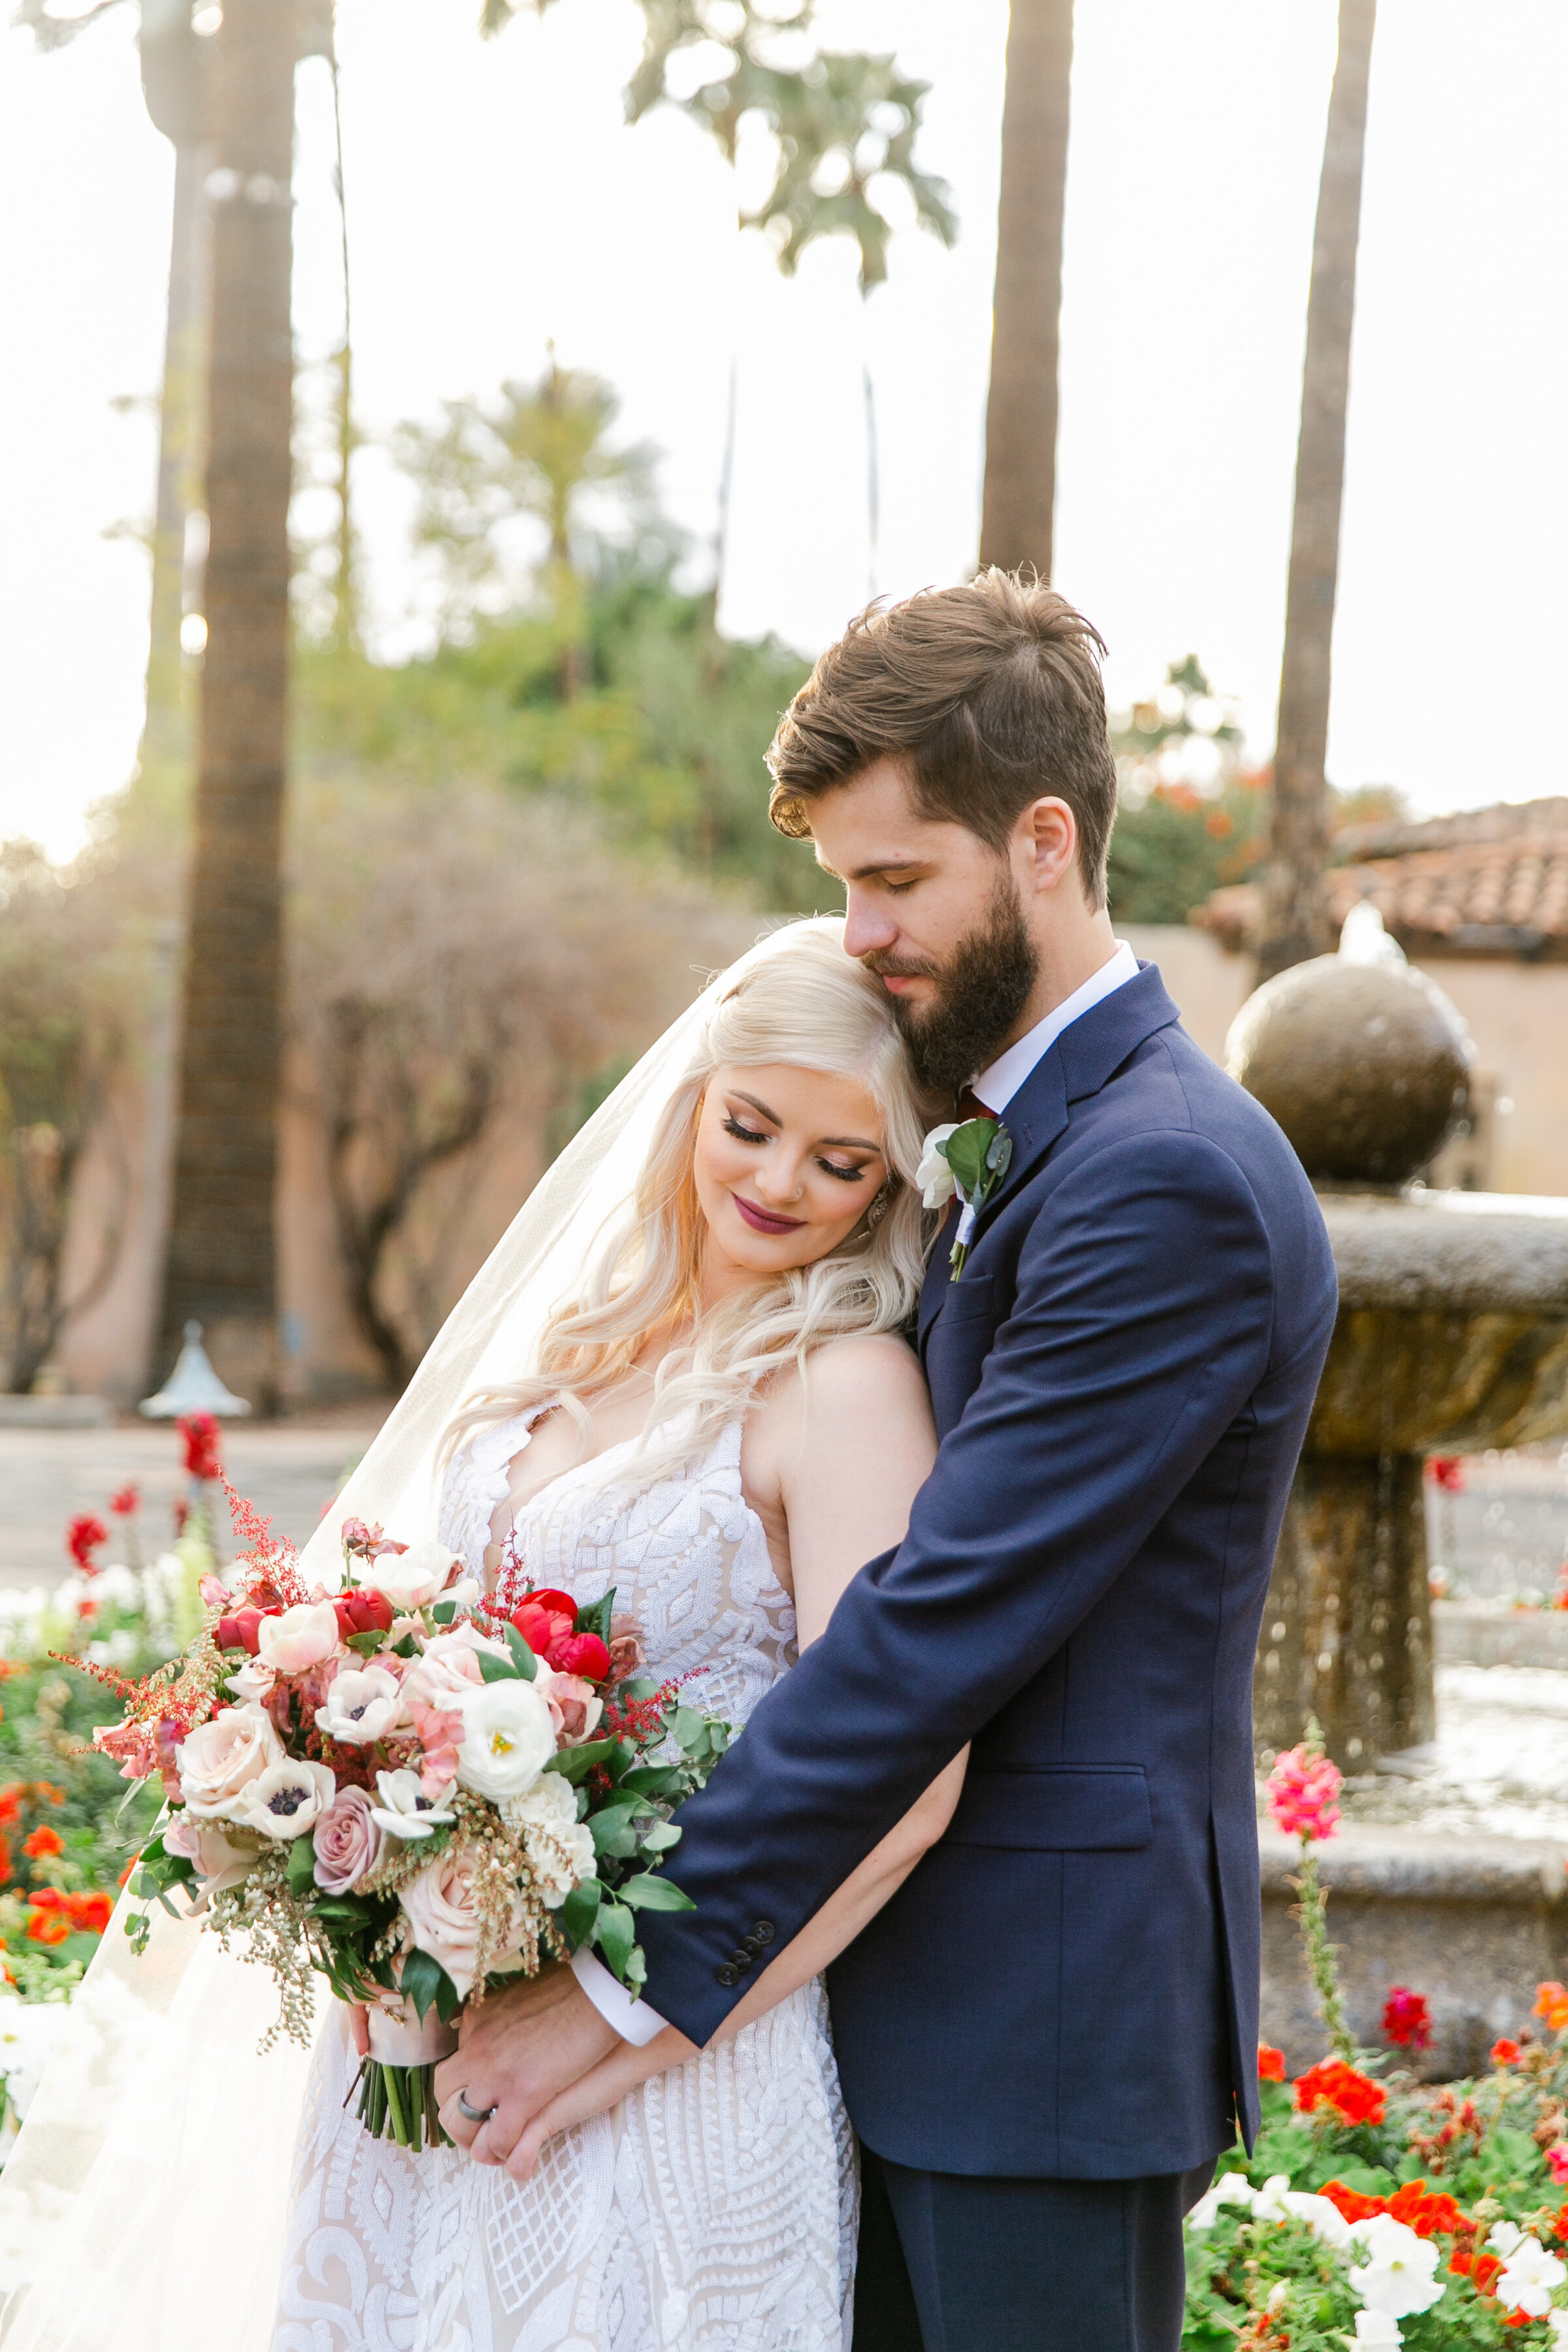 Karlie Colleen Photography - The Royal Palms Wedding - Some Like It Classic - Alex & Sam-545